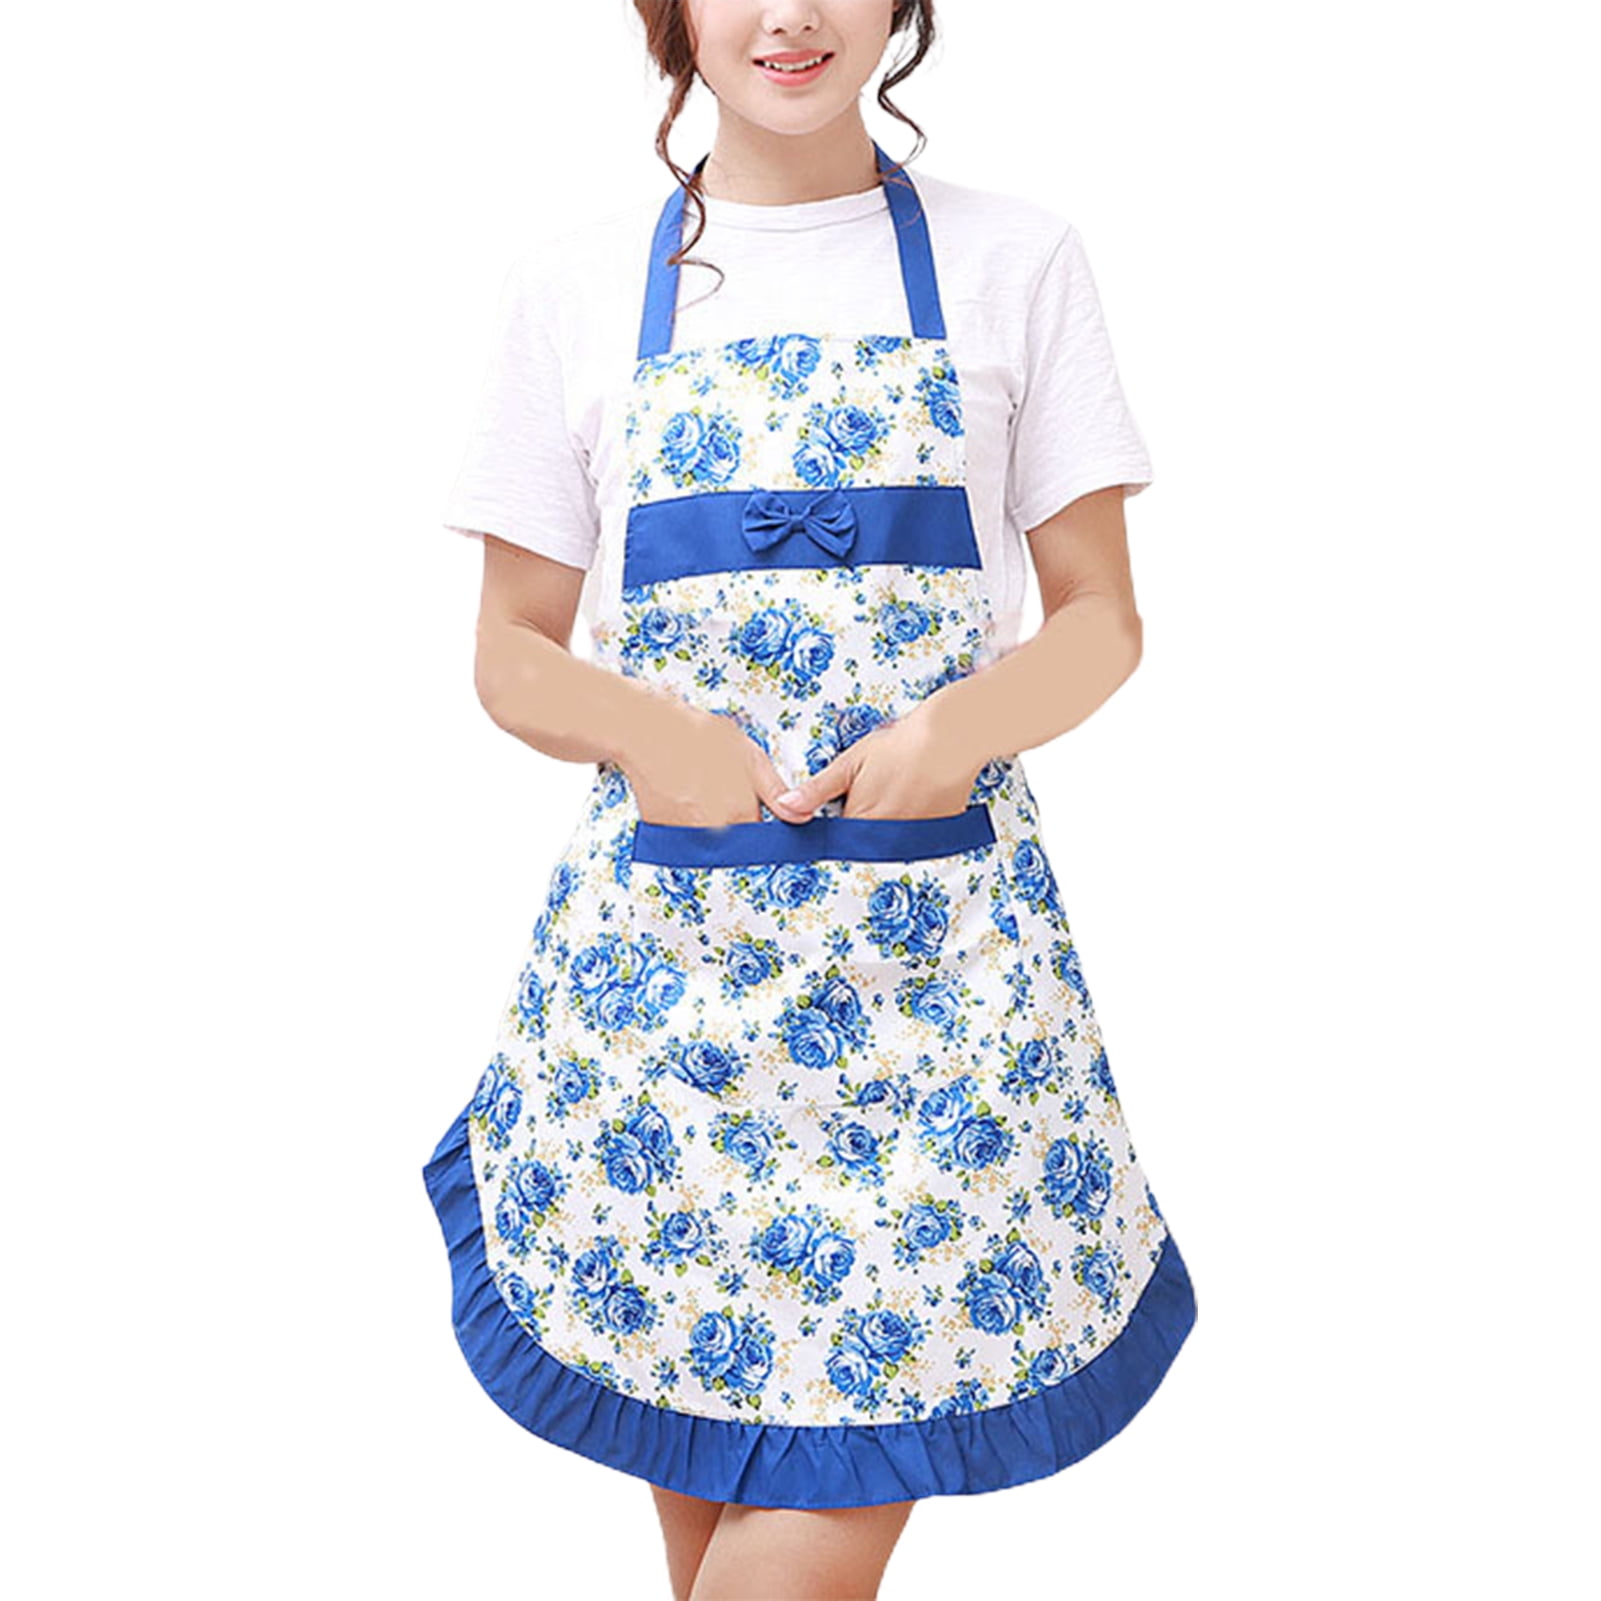 Thank you @Laney for my beautiful blue & white polka dot egg-apron! Or